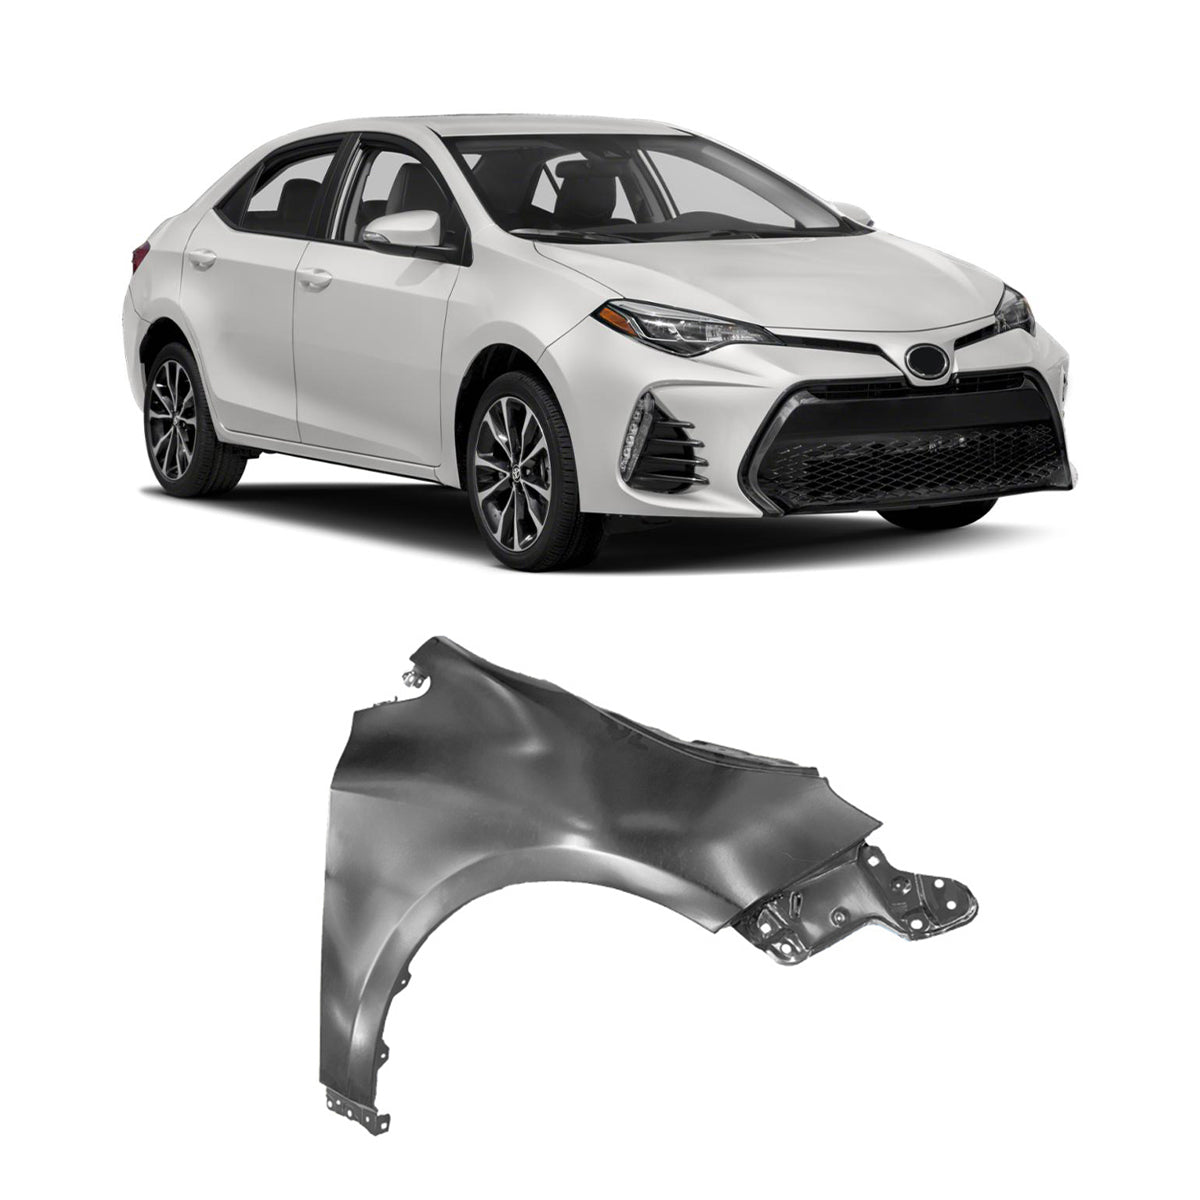 Replacement FRONT FENDER, RH, 2020-2023 Toyota Corolla, (Steel)